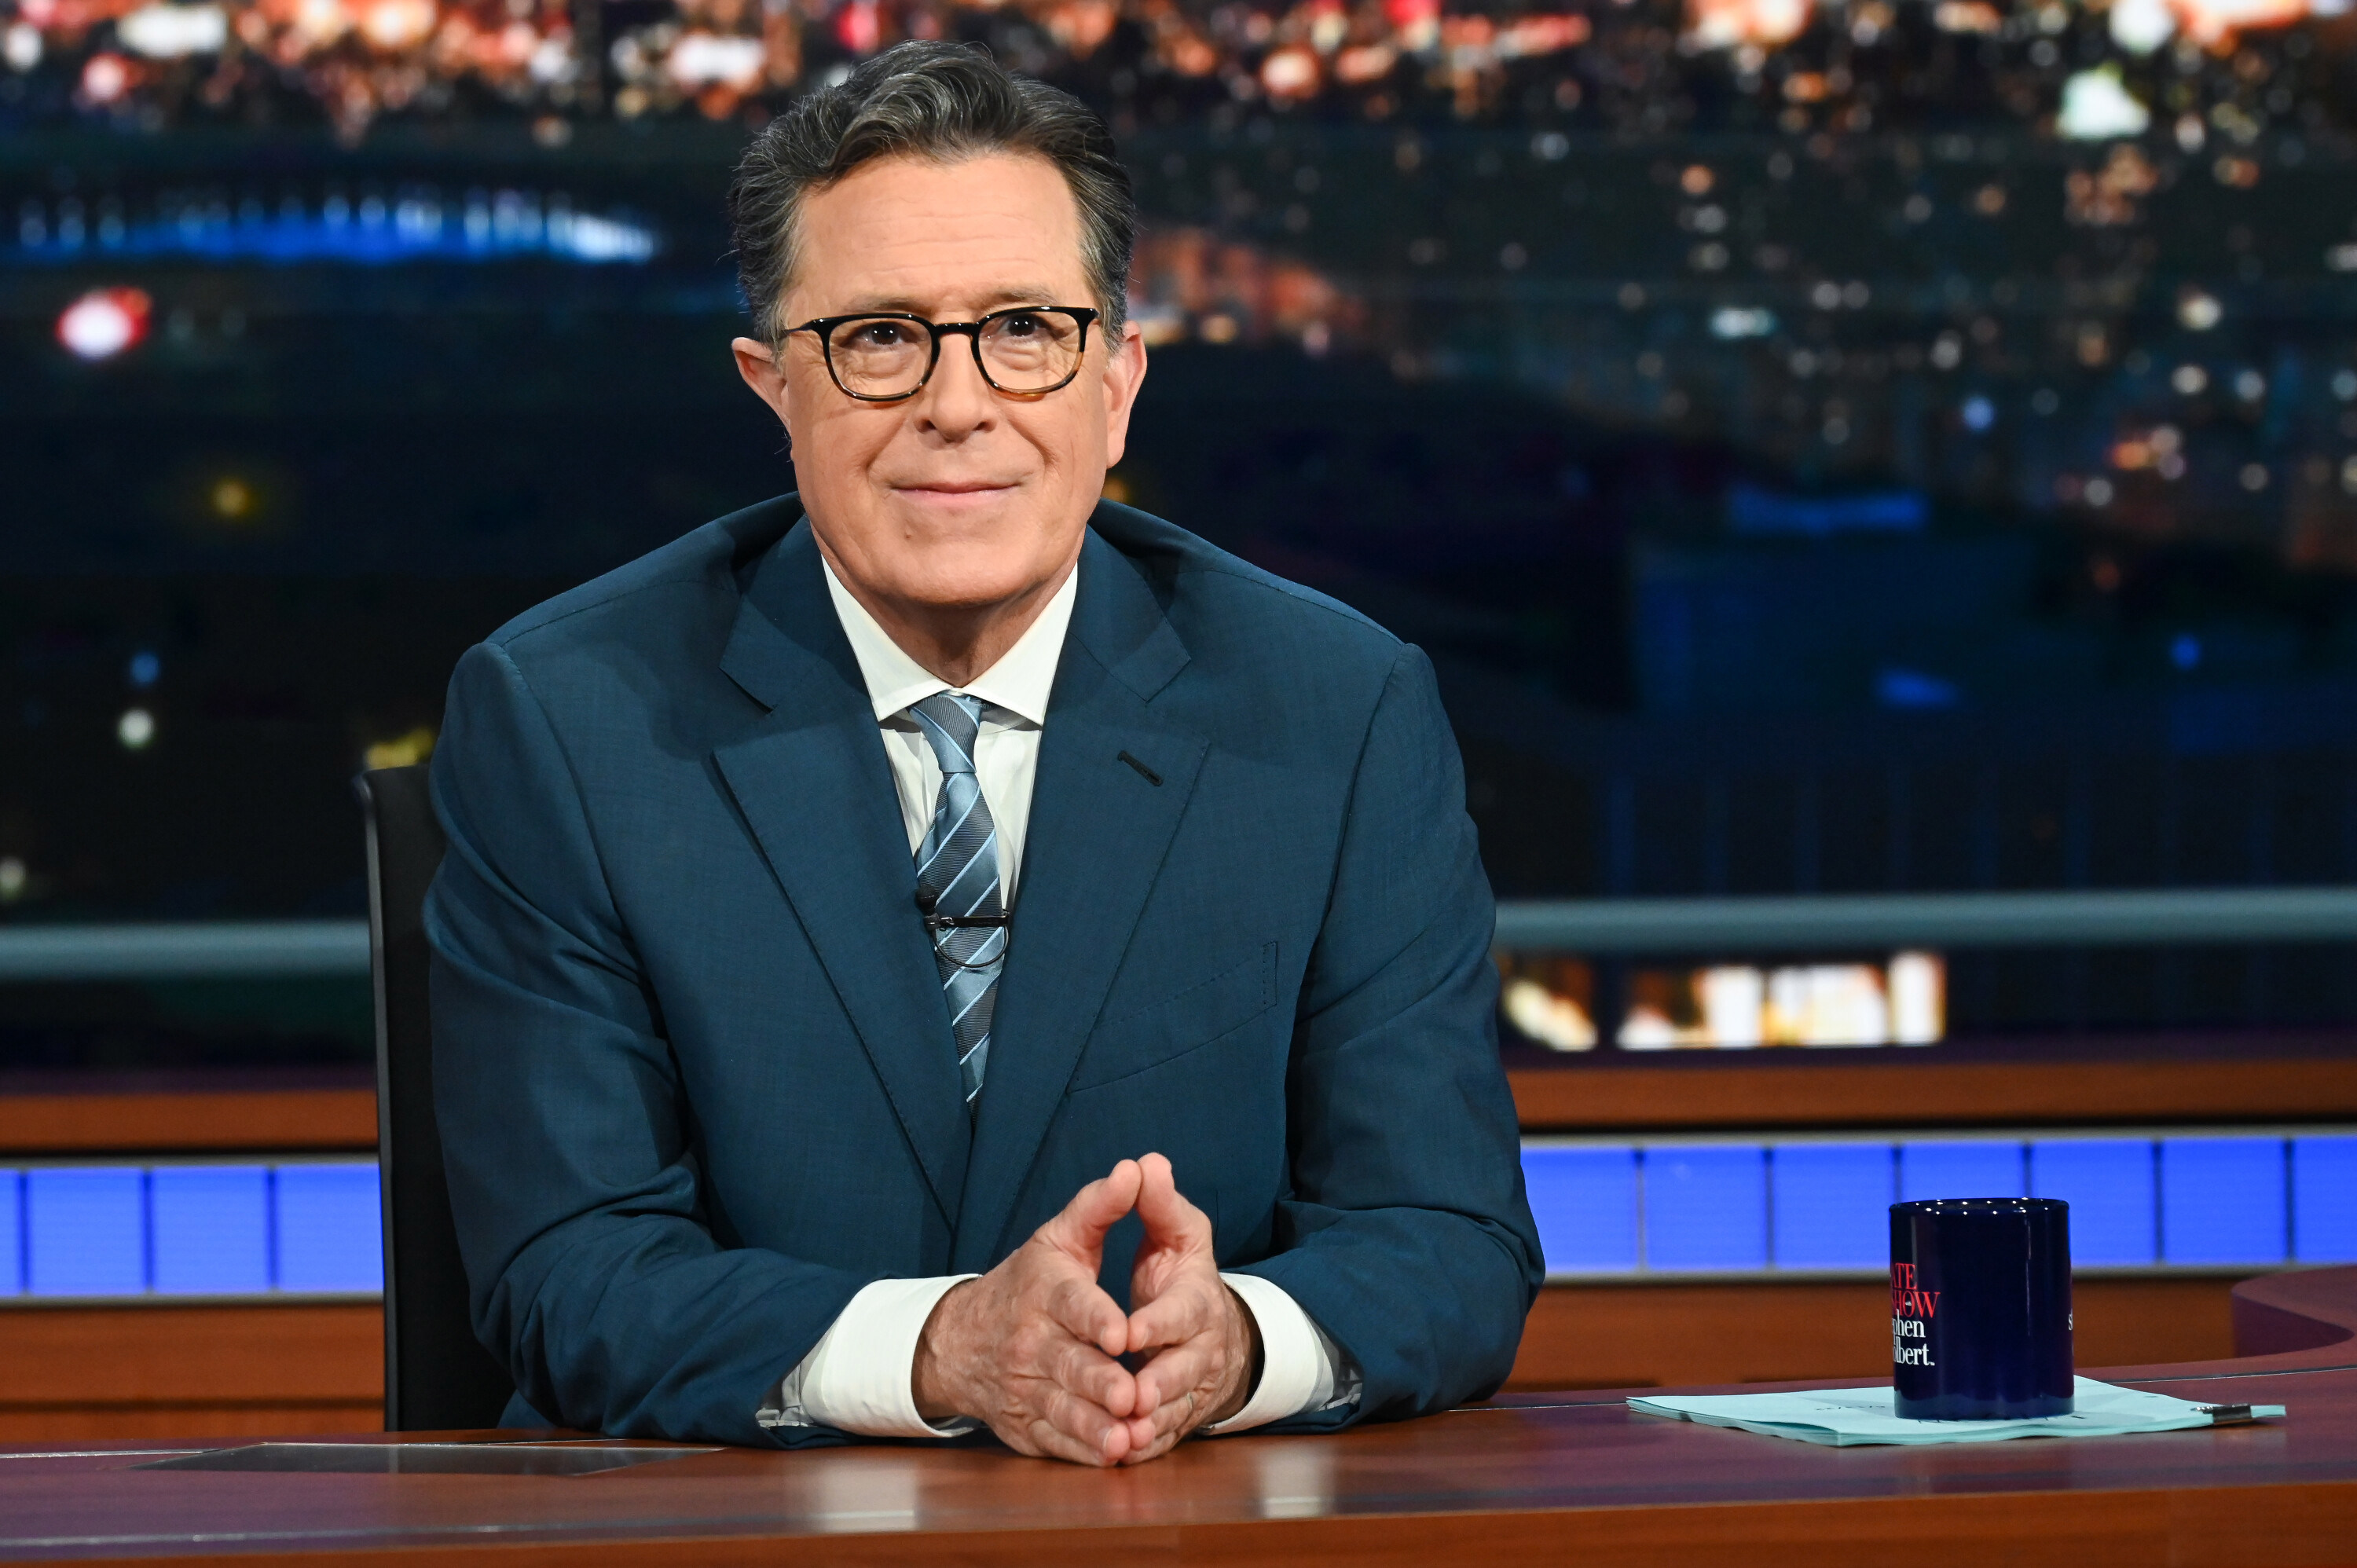 Stephen Colbert Planning To Return To ‘The Late Show' On Monday After